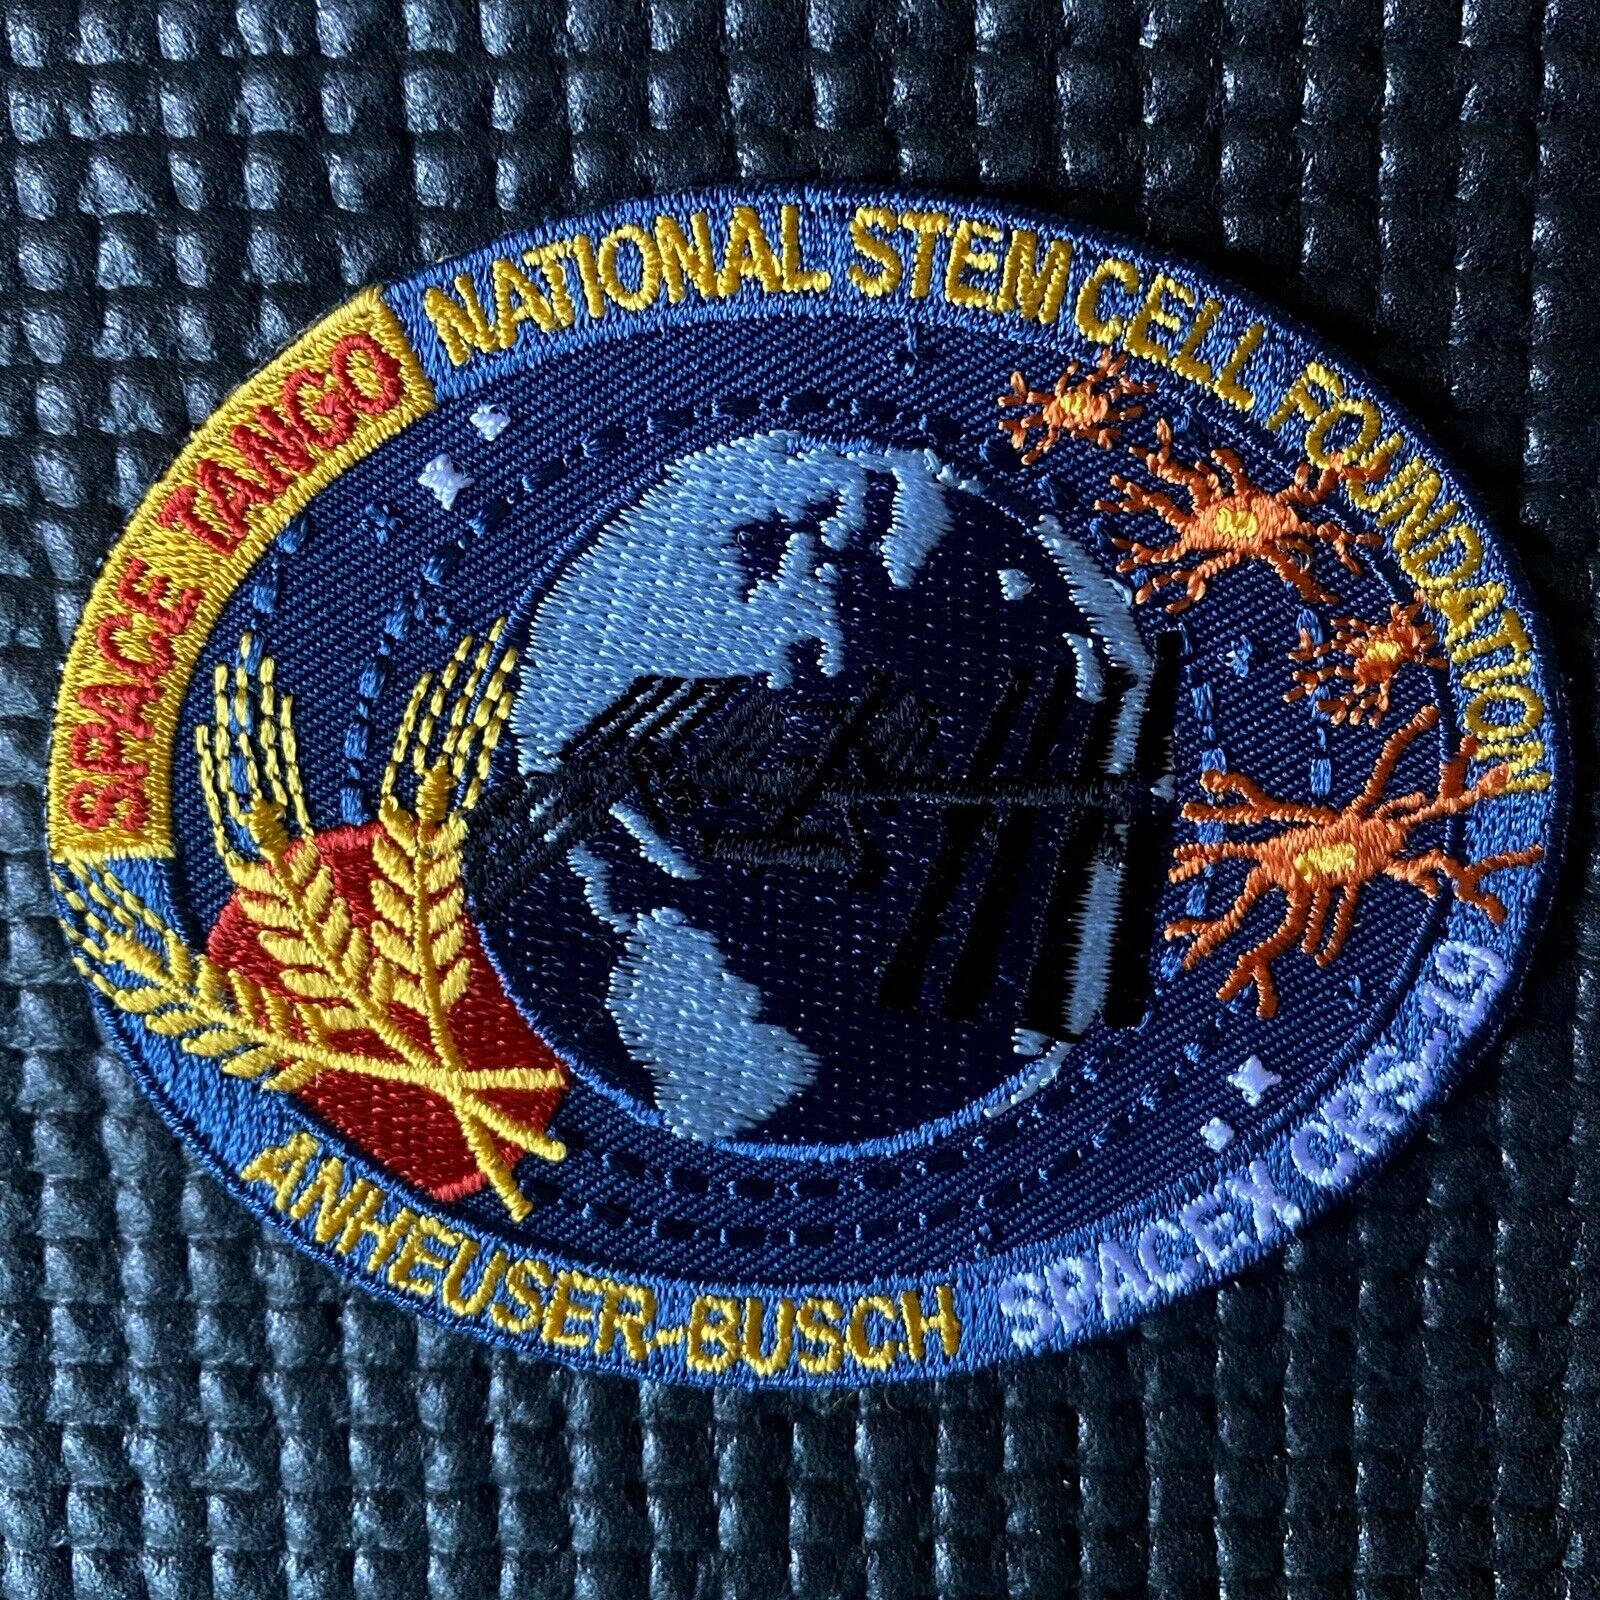 NASA SPACEX -  NATIONAL STEM CELL RESEARCH CRS-19 ISS SPACE MISSION PATCH - 3.5”